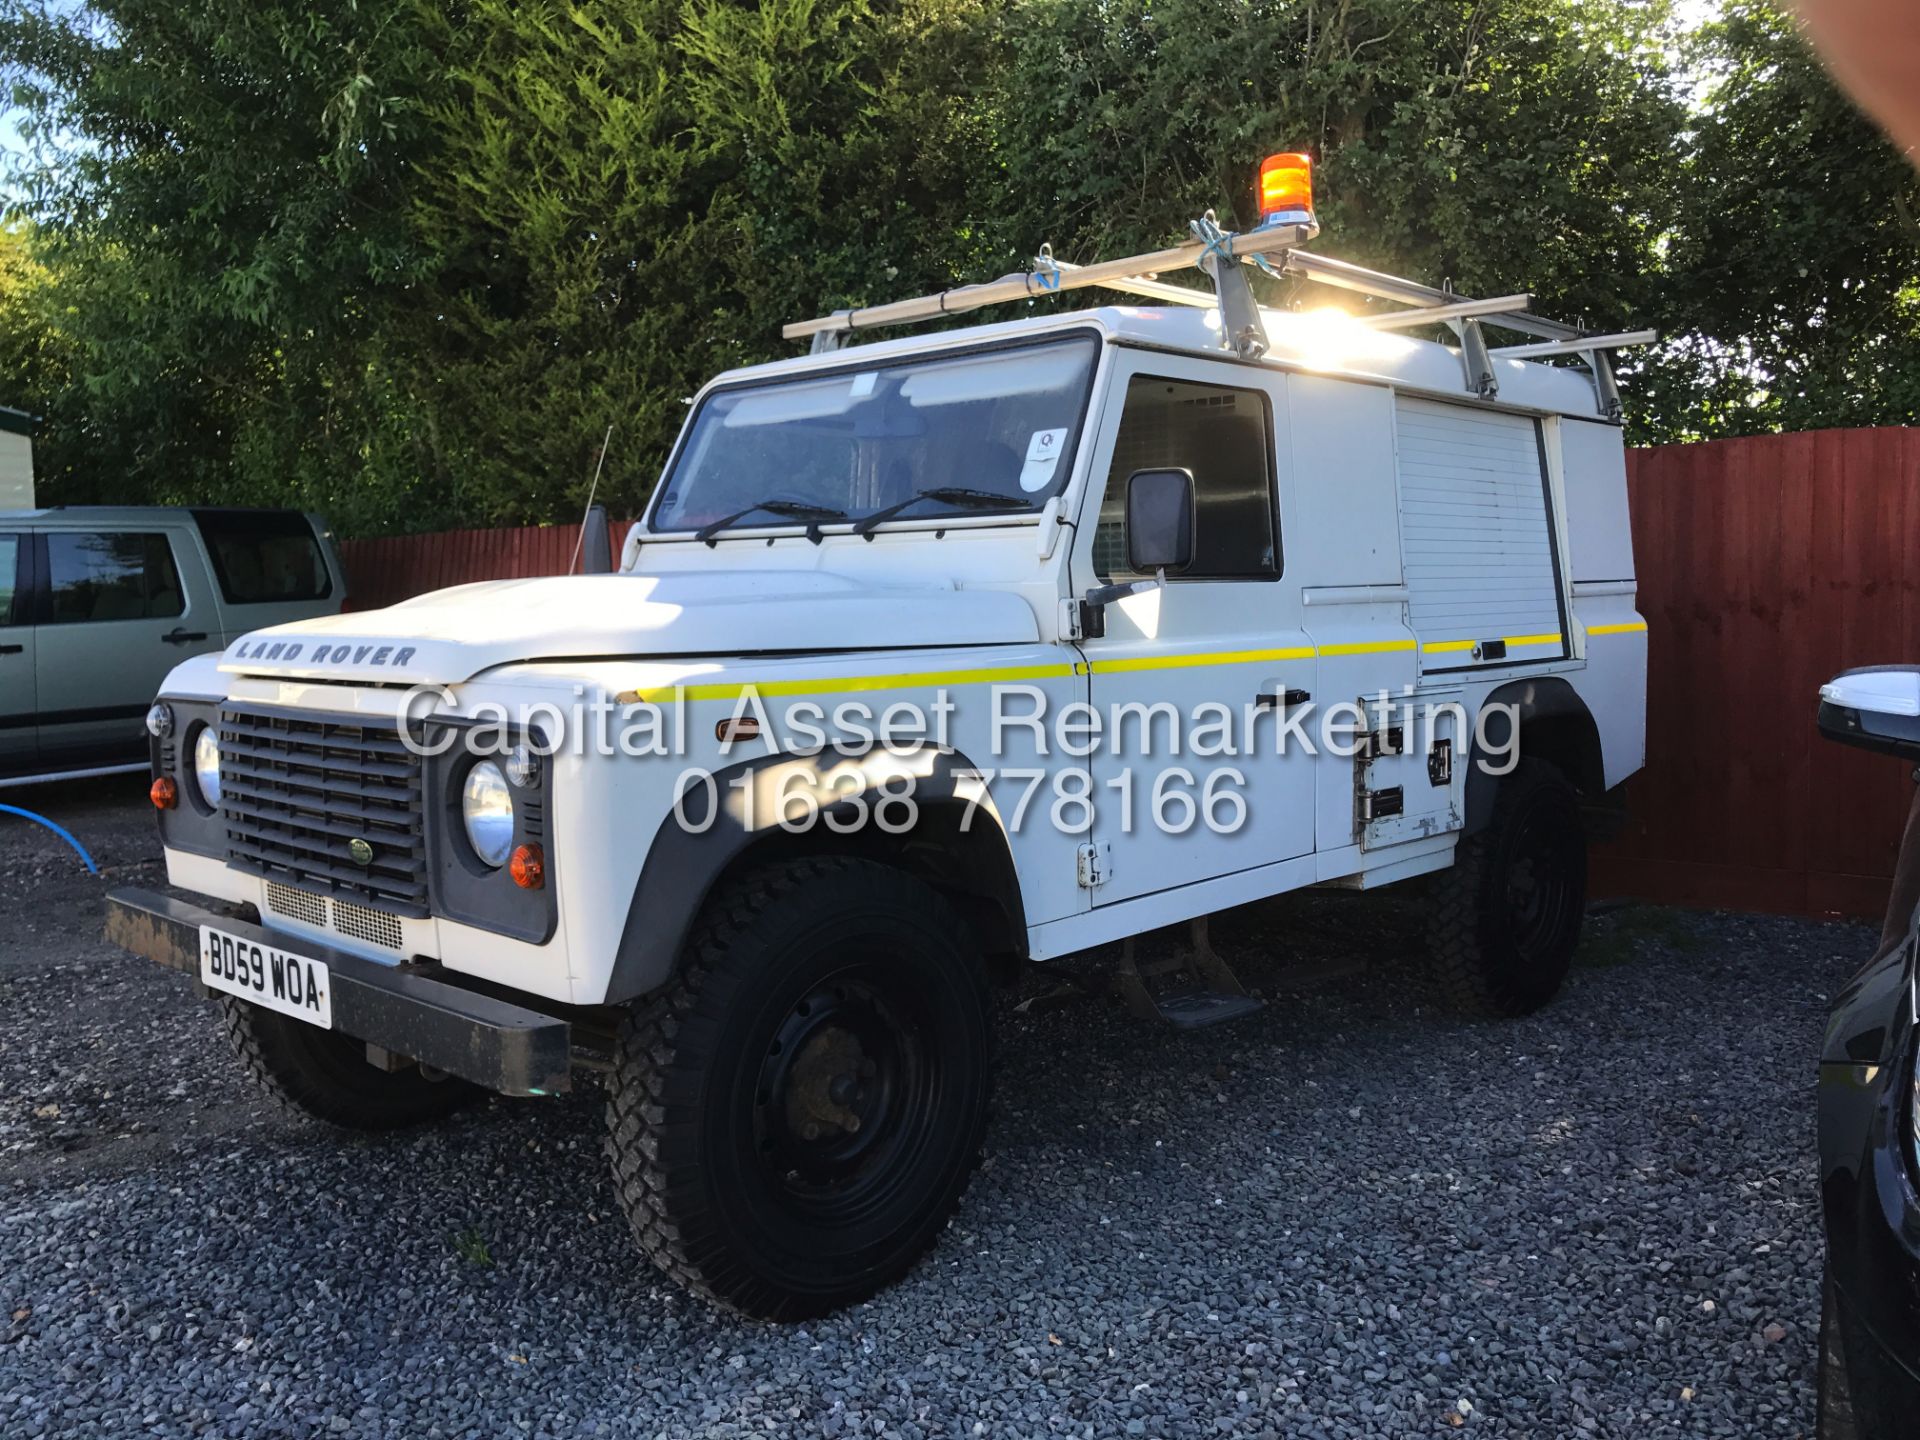 (ON SALE) LAND ROVER DEFENDER 2.4TDCI 110 HARD TOP (SPECIAL UTILITY VEHICLE) 6 SPEED (2010) 1 OWNER